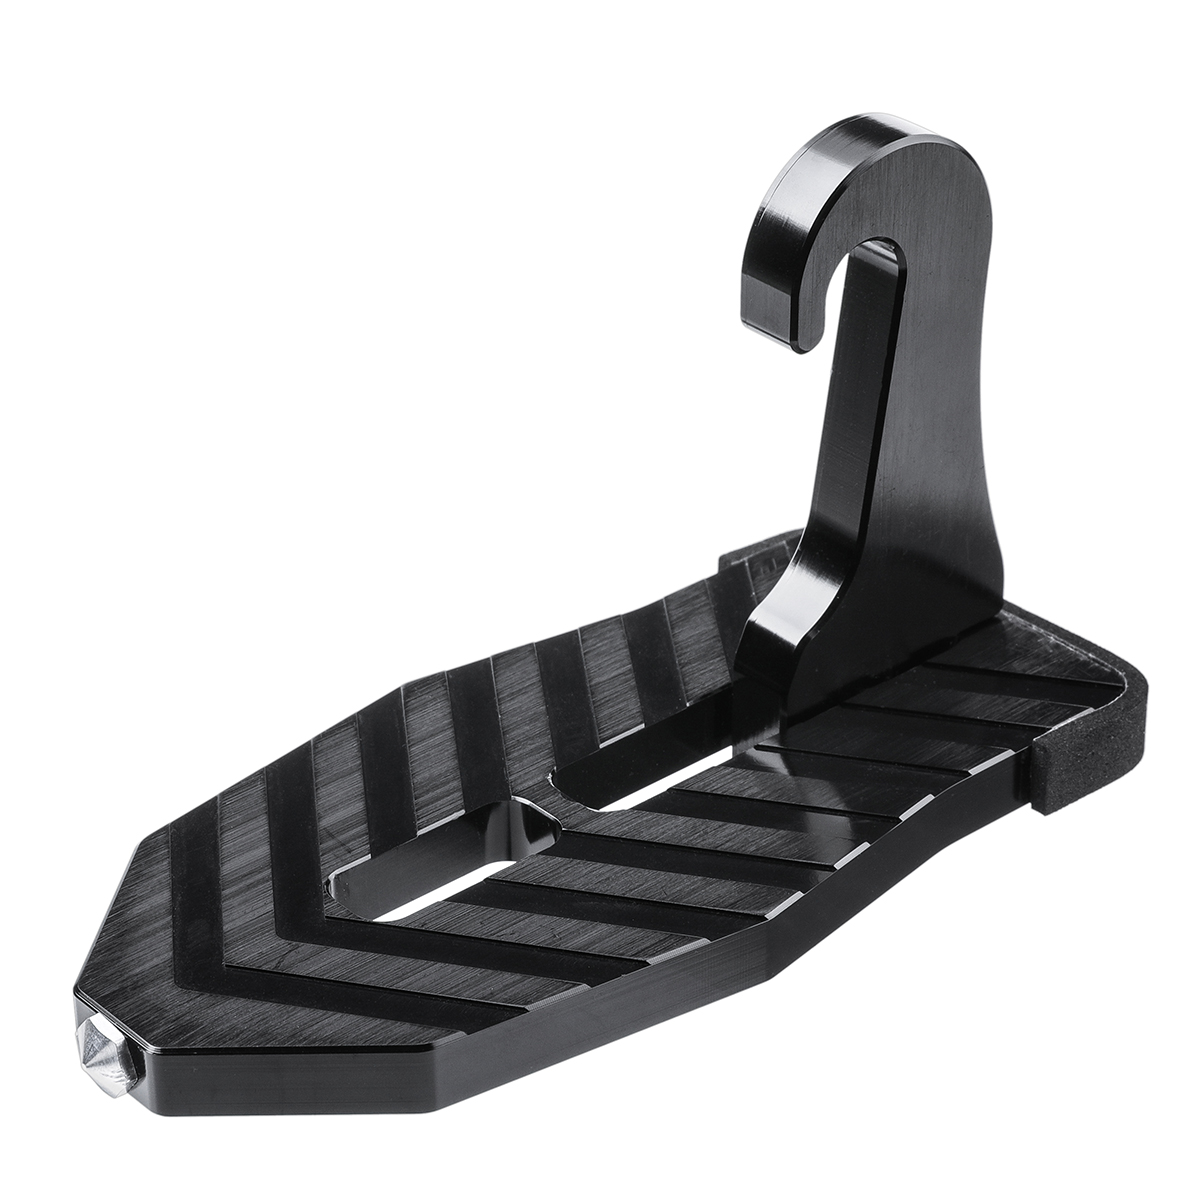 

AUDEW Car Doorstep Vehicle Rooftop Folding Ladder Foot Pedal Hook with Safety Hammer